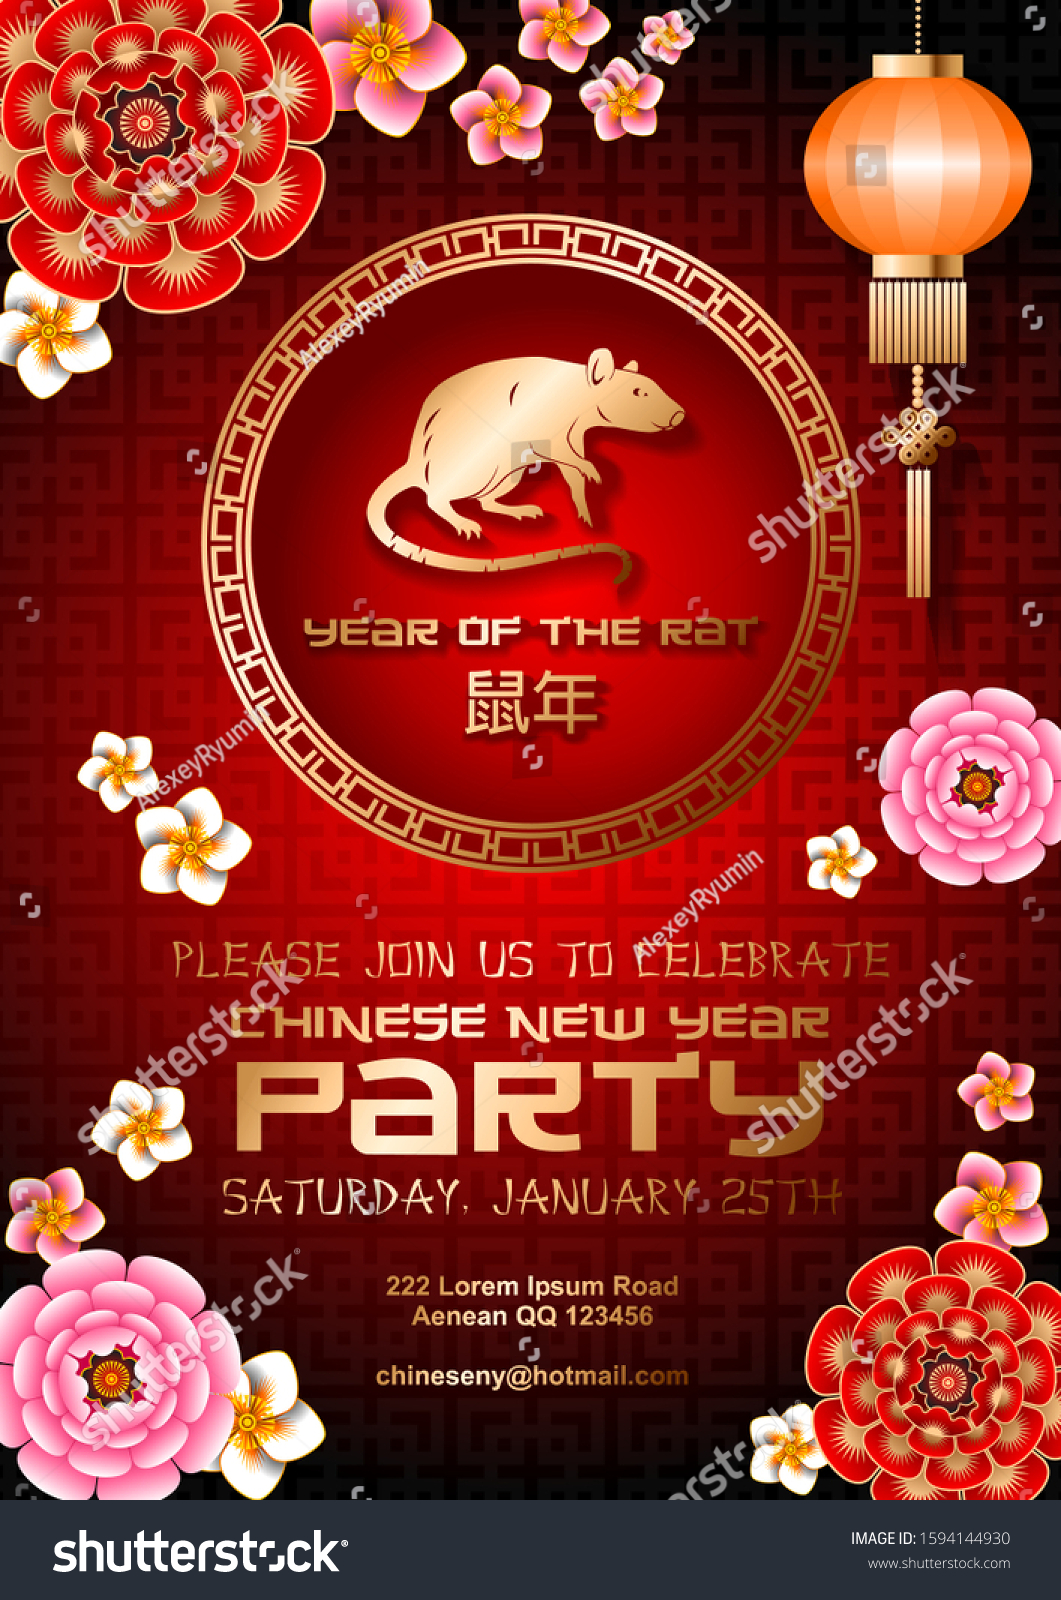 Golden red Chinese New Year of the Rat Party 2020 vector invitation card layout. Golden mouse in ornamental ring, flowers and chinese motifs. Hieroglyph translation Year of the Rat.